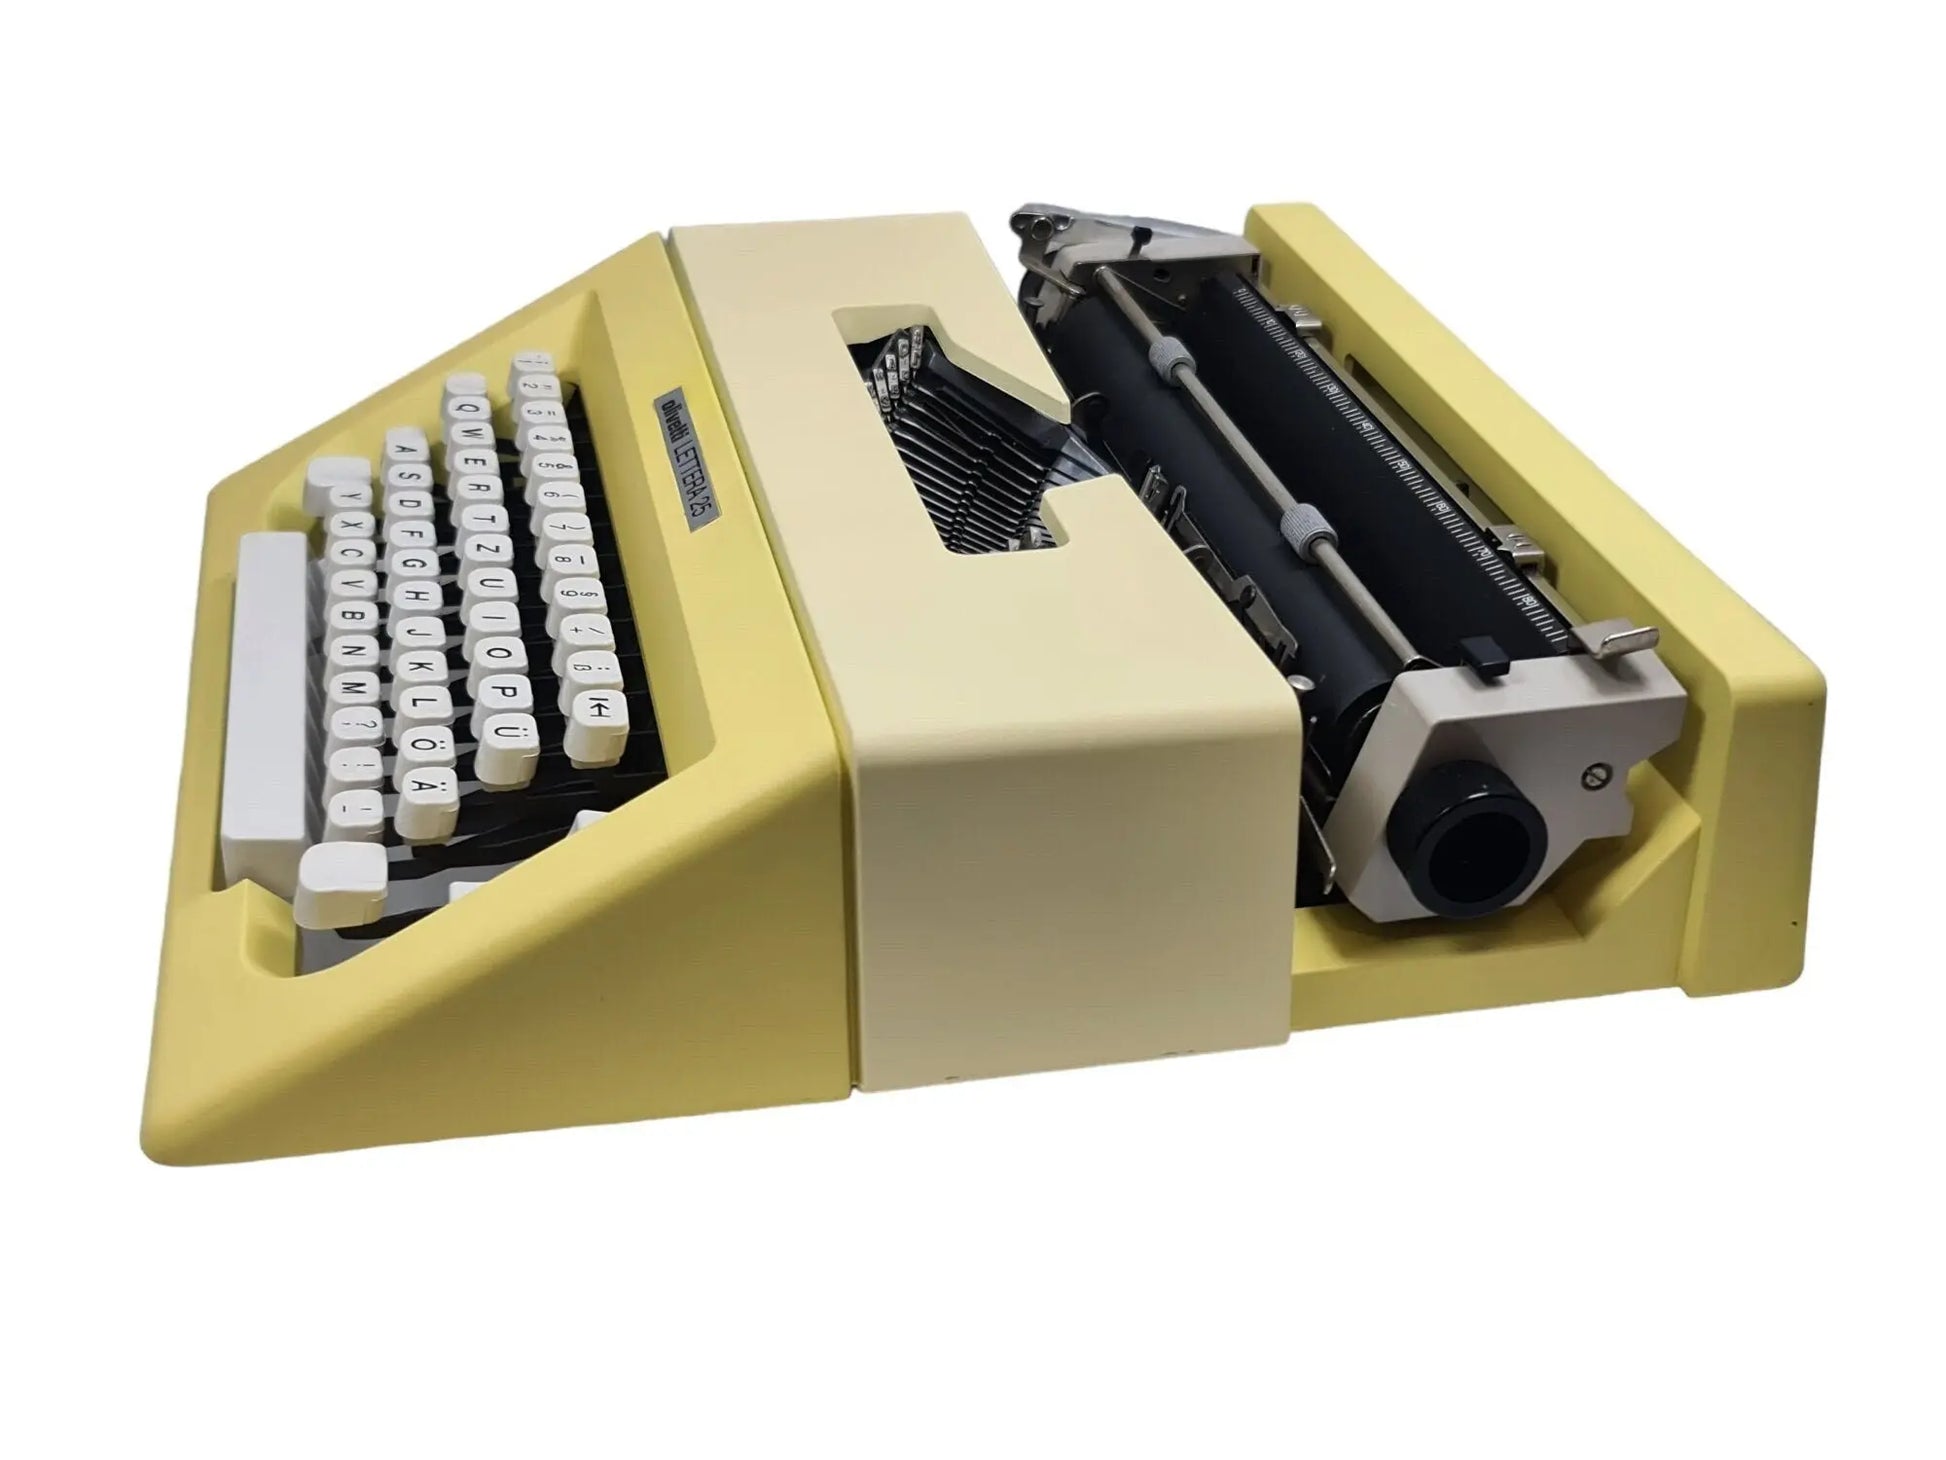 Olivetti Lettera 25 Buttercream Yellow Typewriter, Vintage, Manual Portable, Professionally Serviced by Typewriter.Company - ElGranero Typewriter.Company